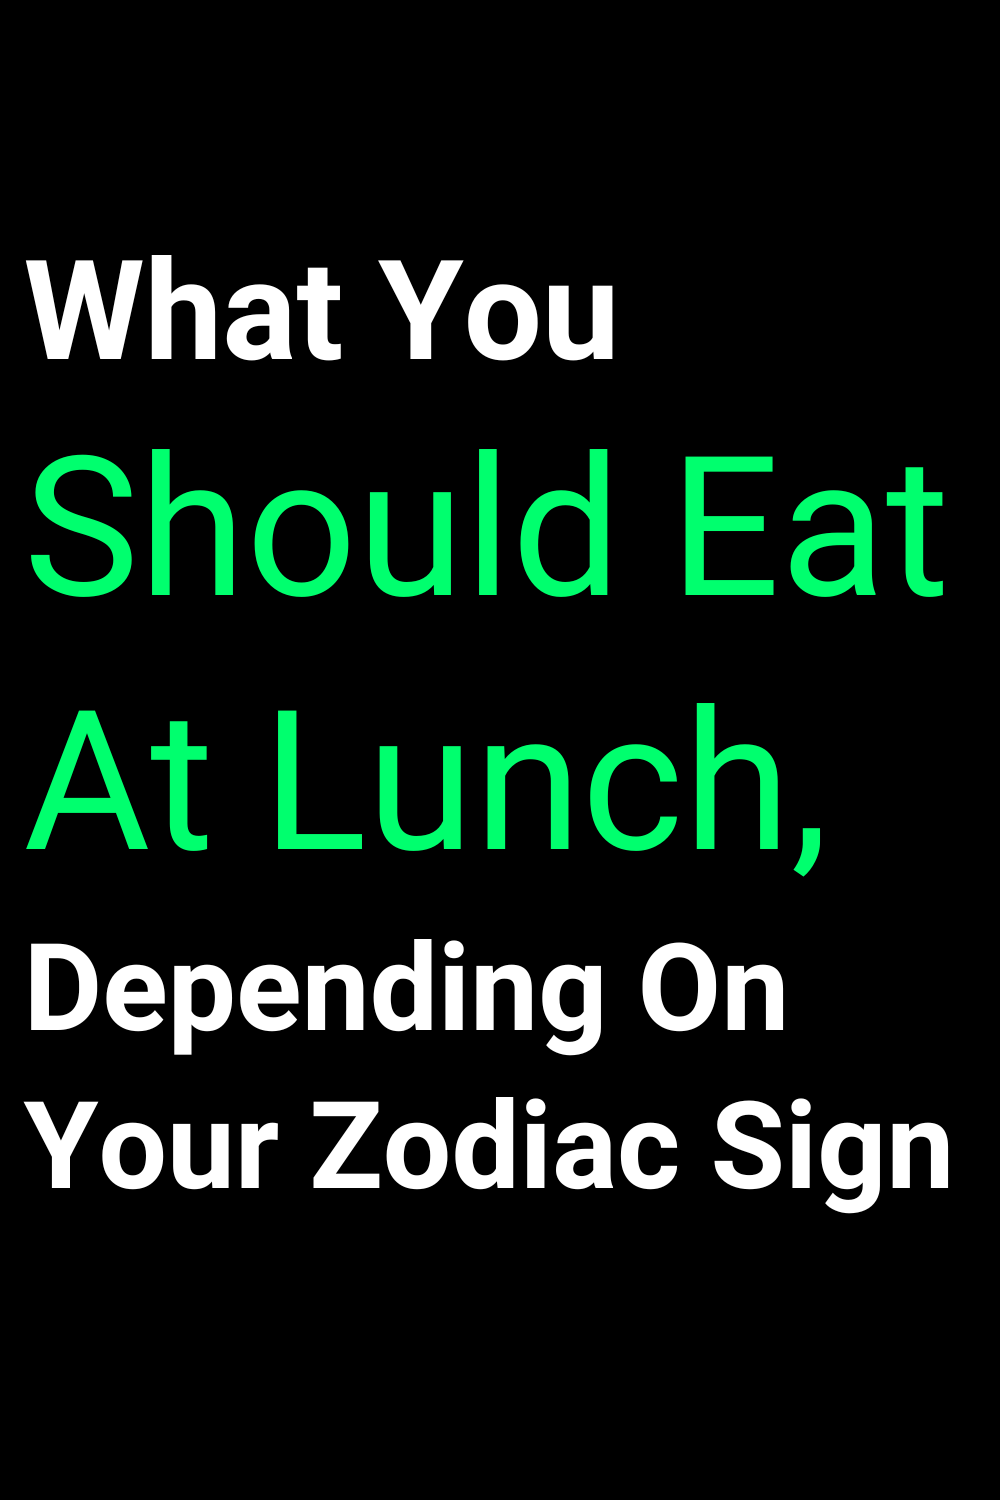 What You Should Eat At Lunch, Depending On Your Zodiac Sign